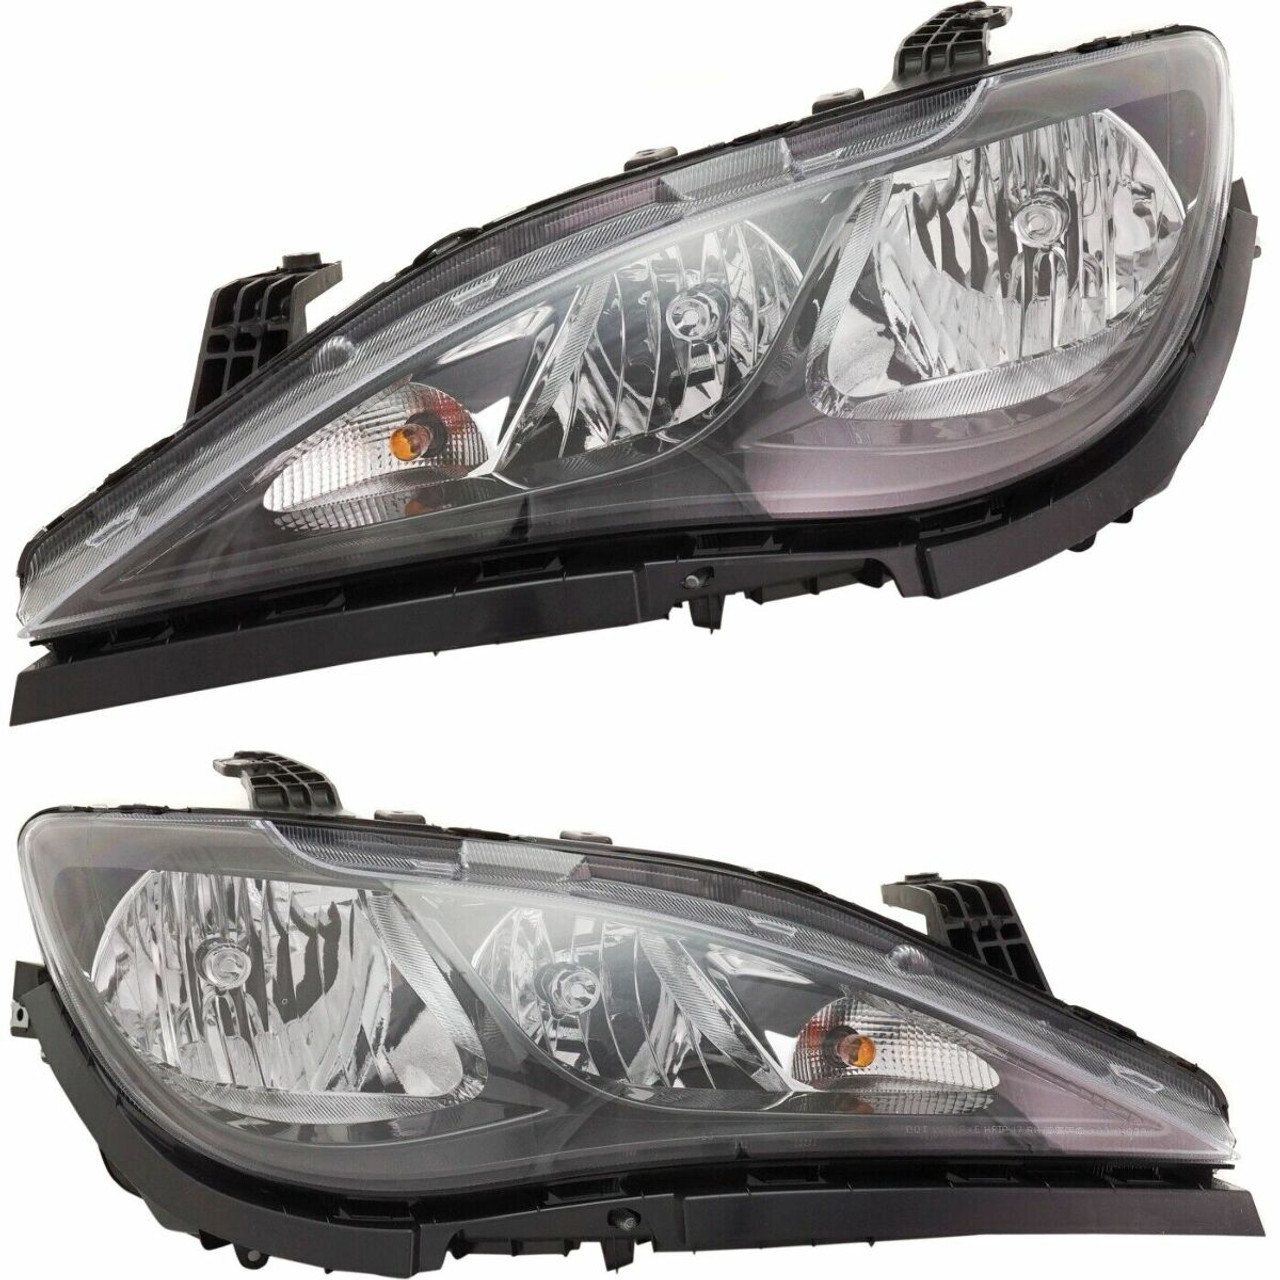 For 17-23 Chry Pacifica Left & Right Halogen Headlight Assemblies Set w/out Quad